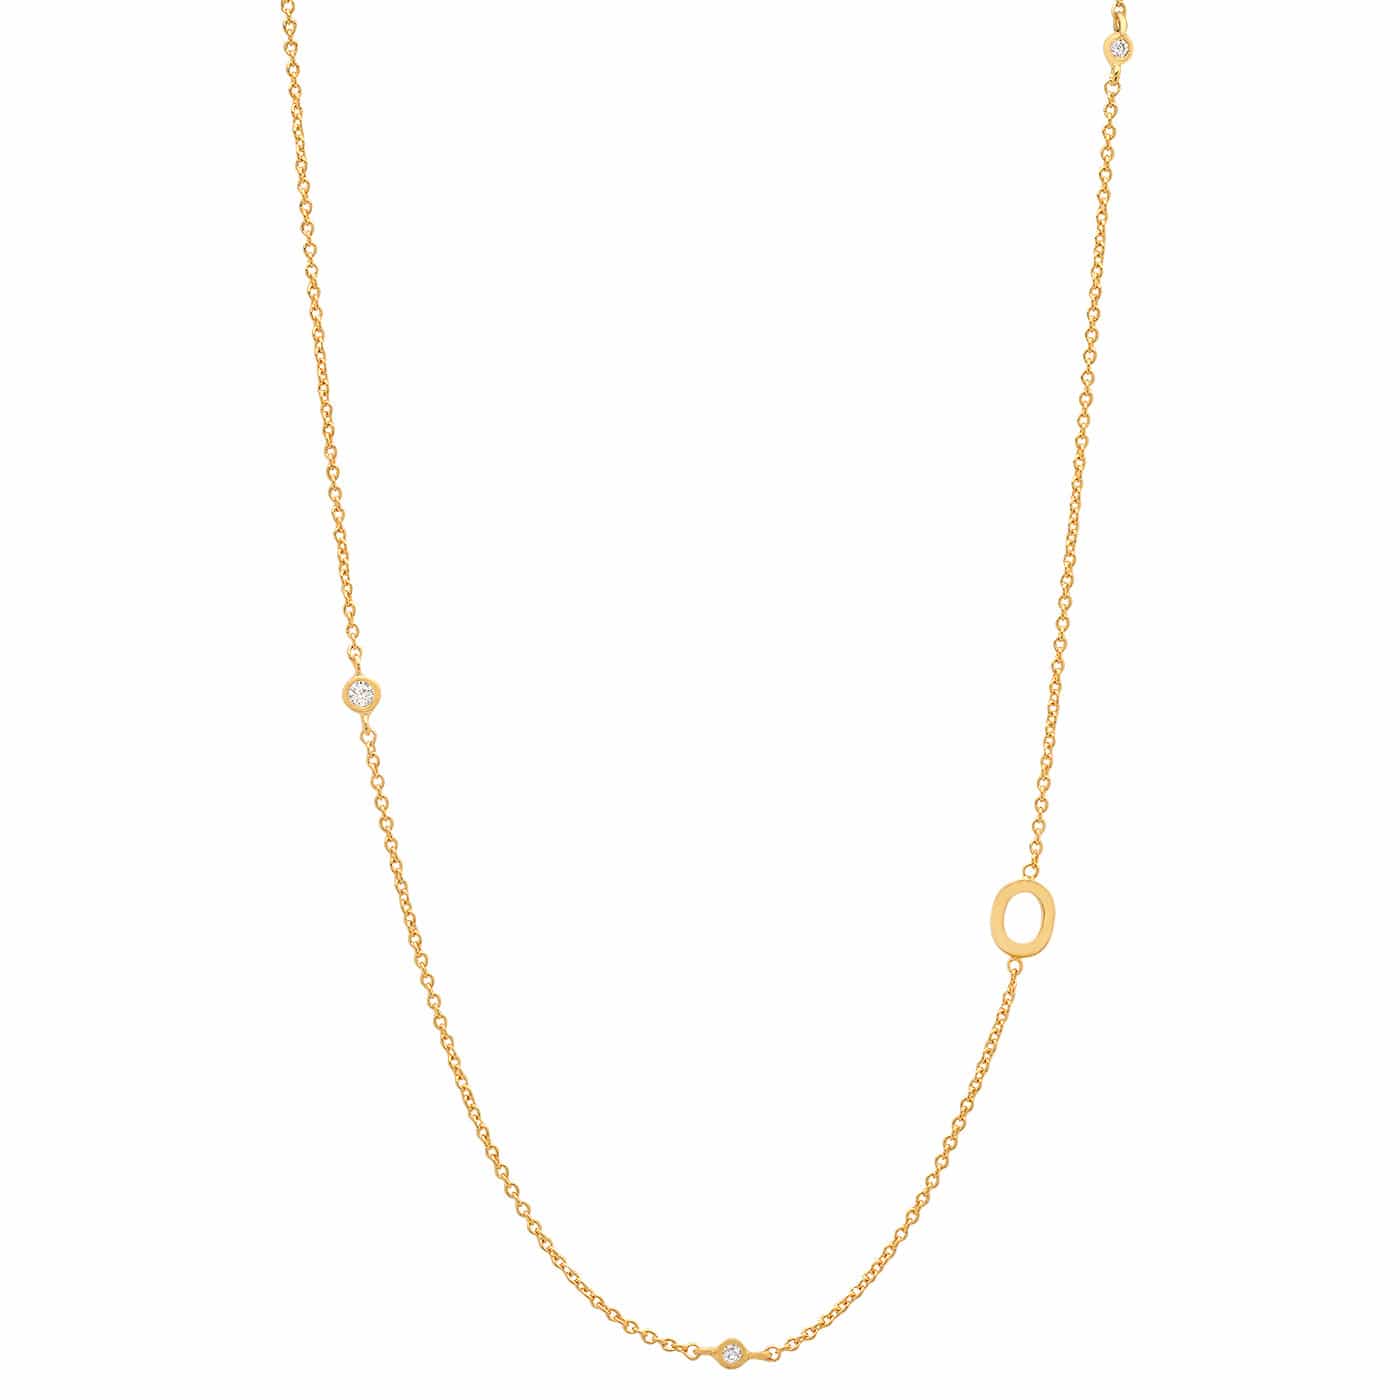 TAI JEWELRY Necklace O Sideways Initial Gold Necklace With CZ Accents